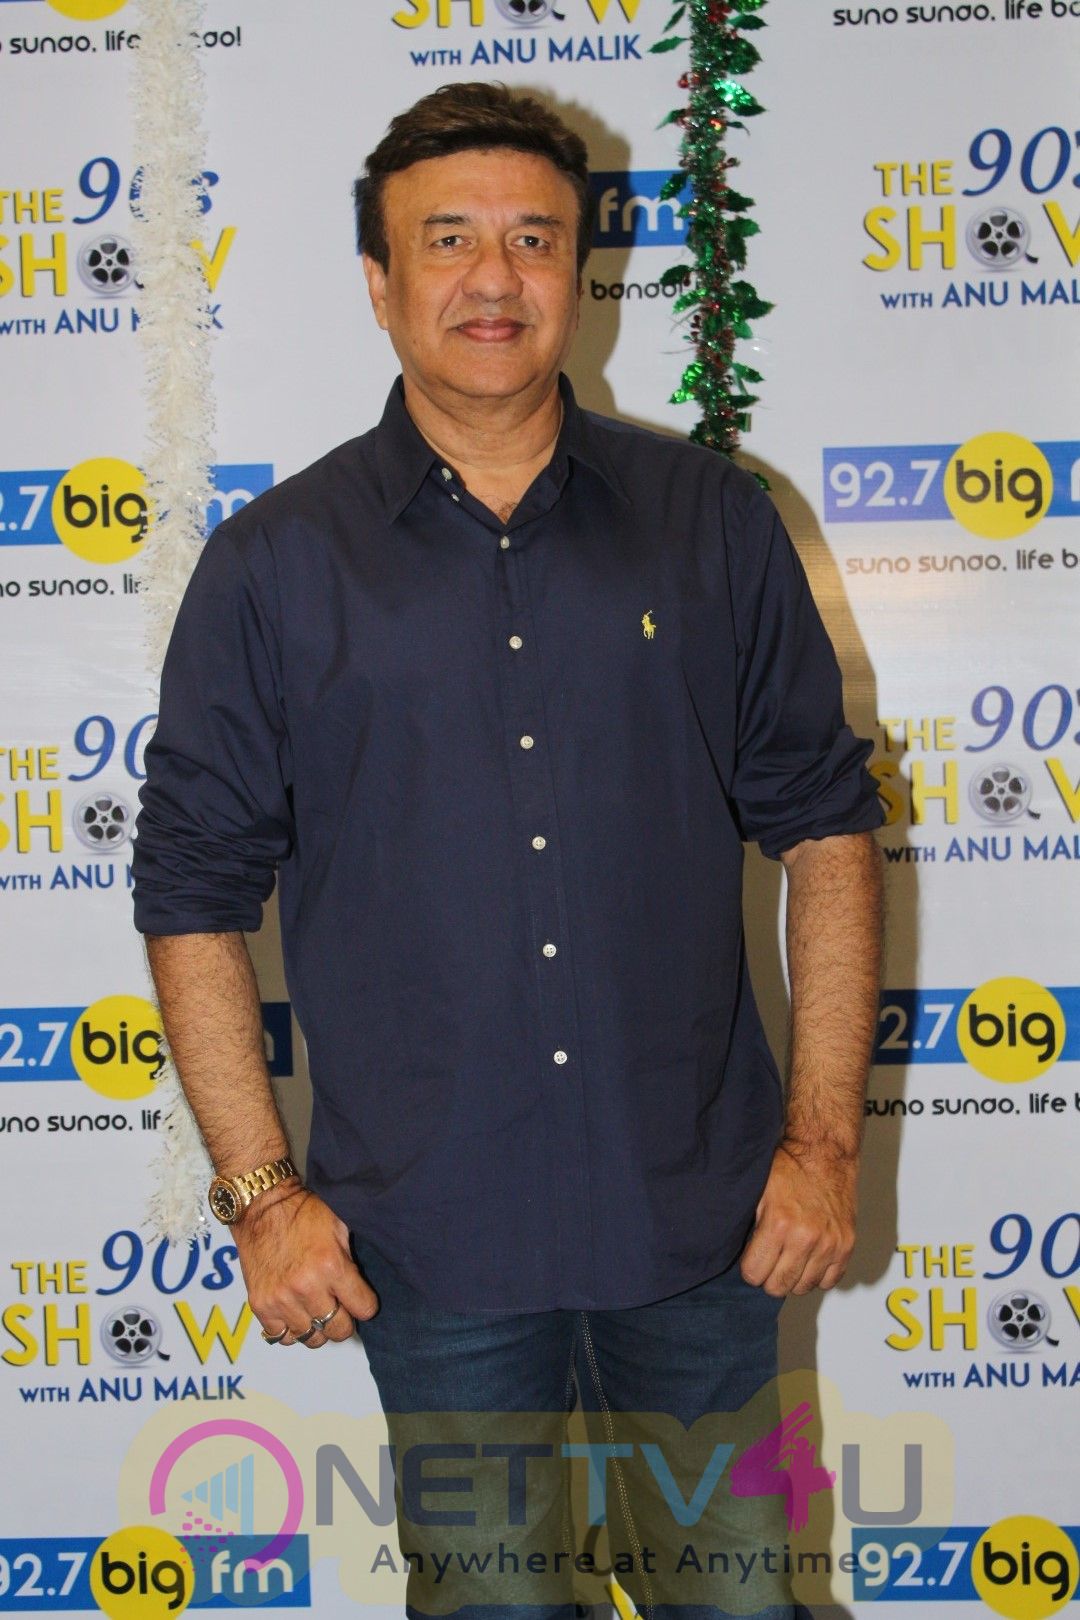  Launch Of 90's Show With Anu Malik At Big FM Images Hindi Gallery